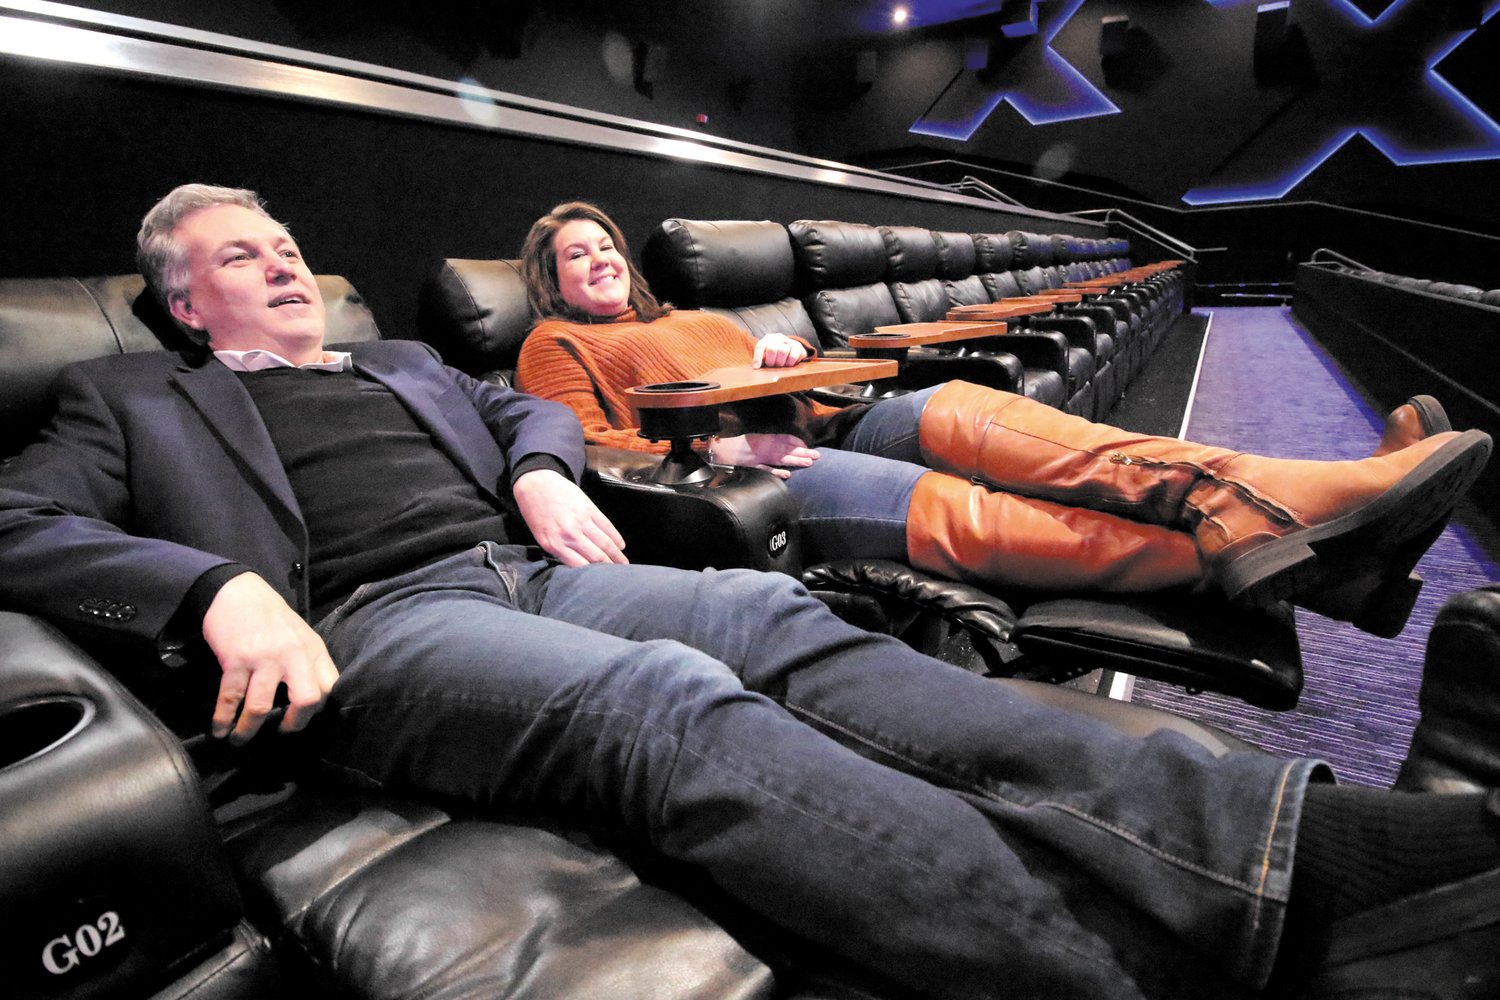 STRETCHED OUT: Mark Malinowski, vice president of Global Marketing for Showcase
Cinemas and Colleen McCormick Blair, who handles public relations for the company, relax
while discussing features of the XPlus theater. The first of the renovated auditoriums seats
170. Malinowski guaranteed viewers won’t be falling asleep during the 3-hour “The Batman”.
“There’s too much action,” he said.